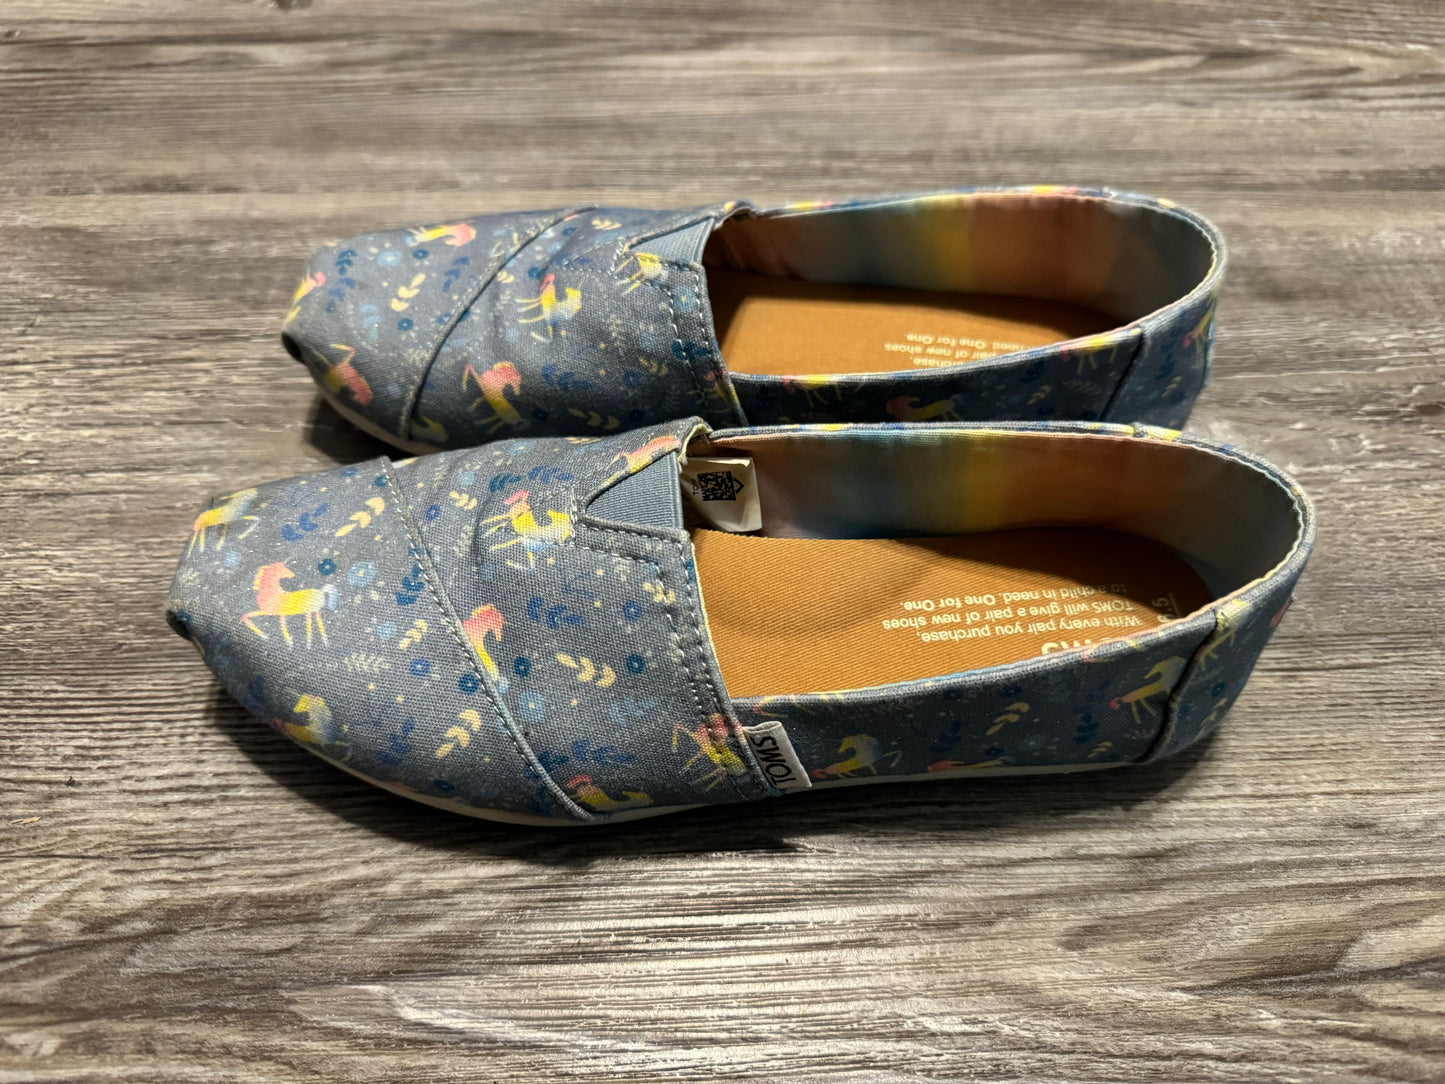 Shoes Flats Other By Toms  Size: 6.5